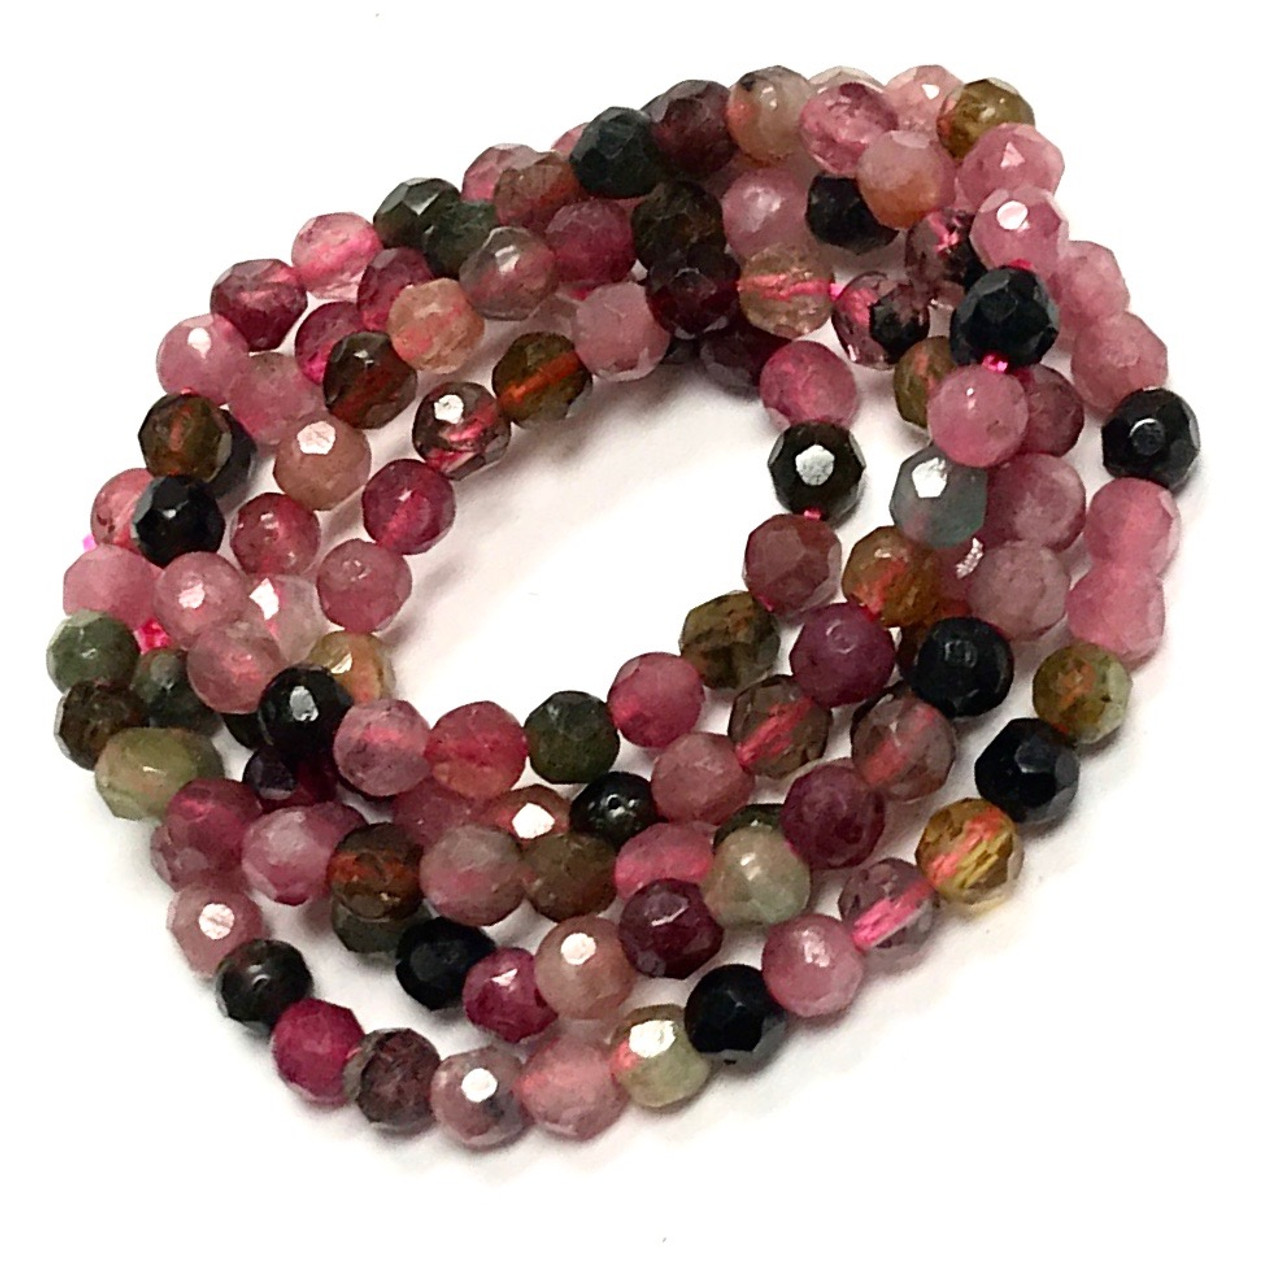 Rainbow Tourmaline Faceted Rondelle Beads, Wholesale Beads Store - Dearbeads